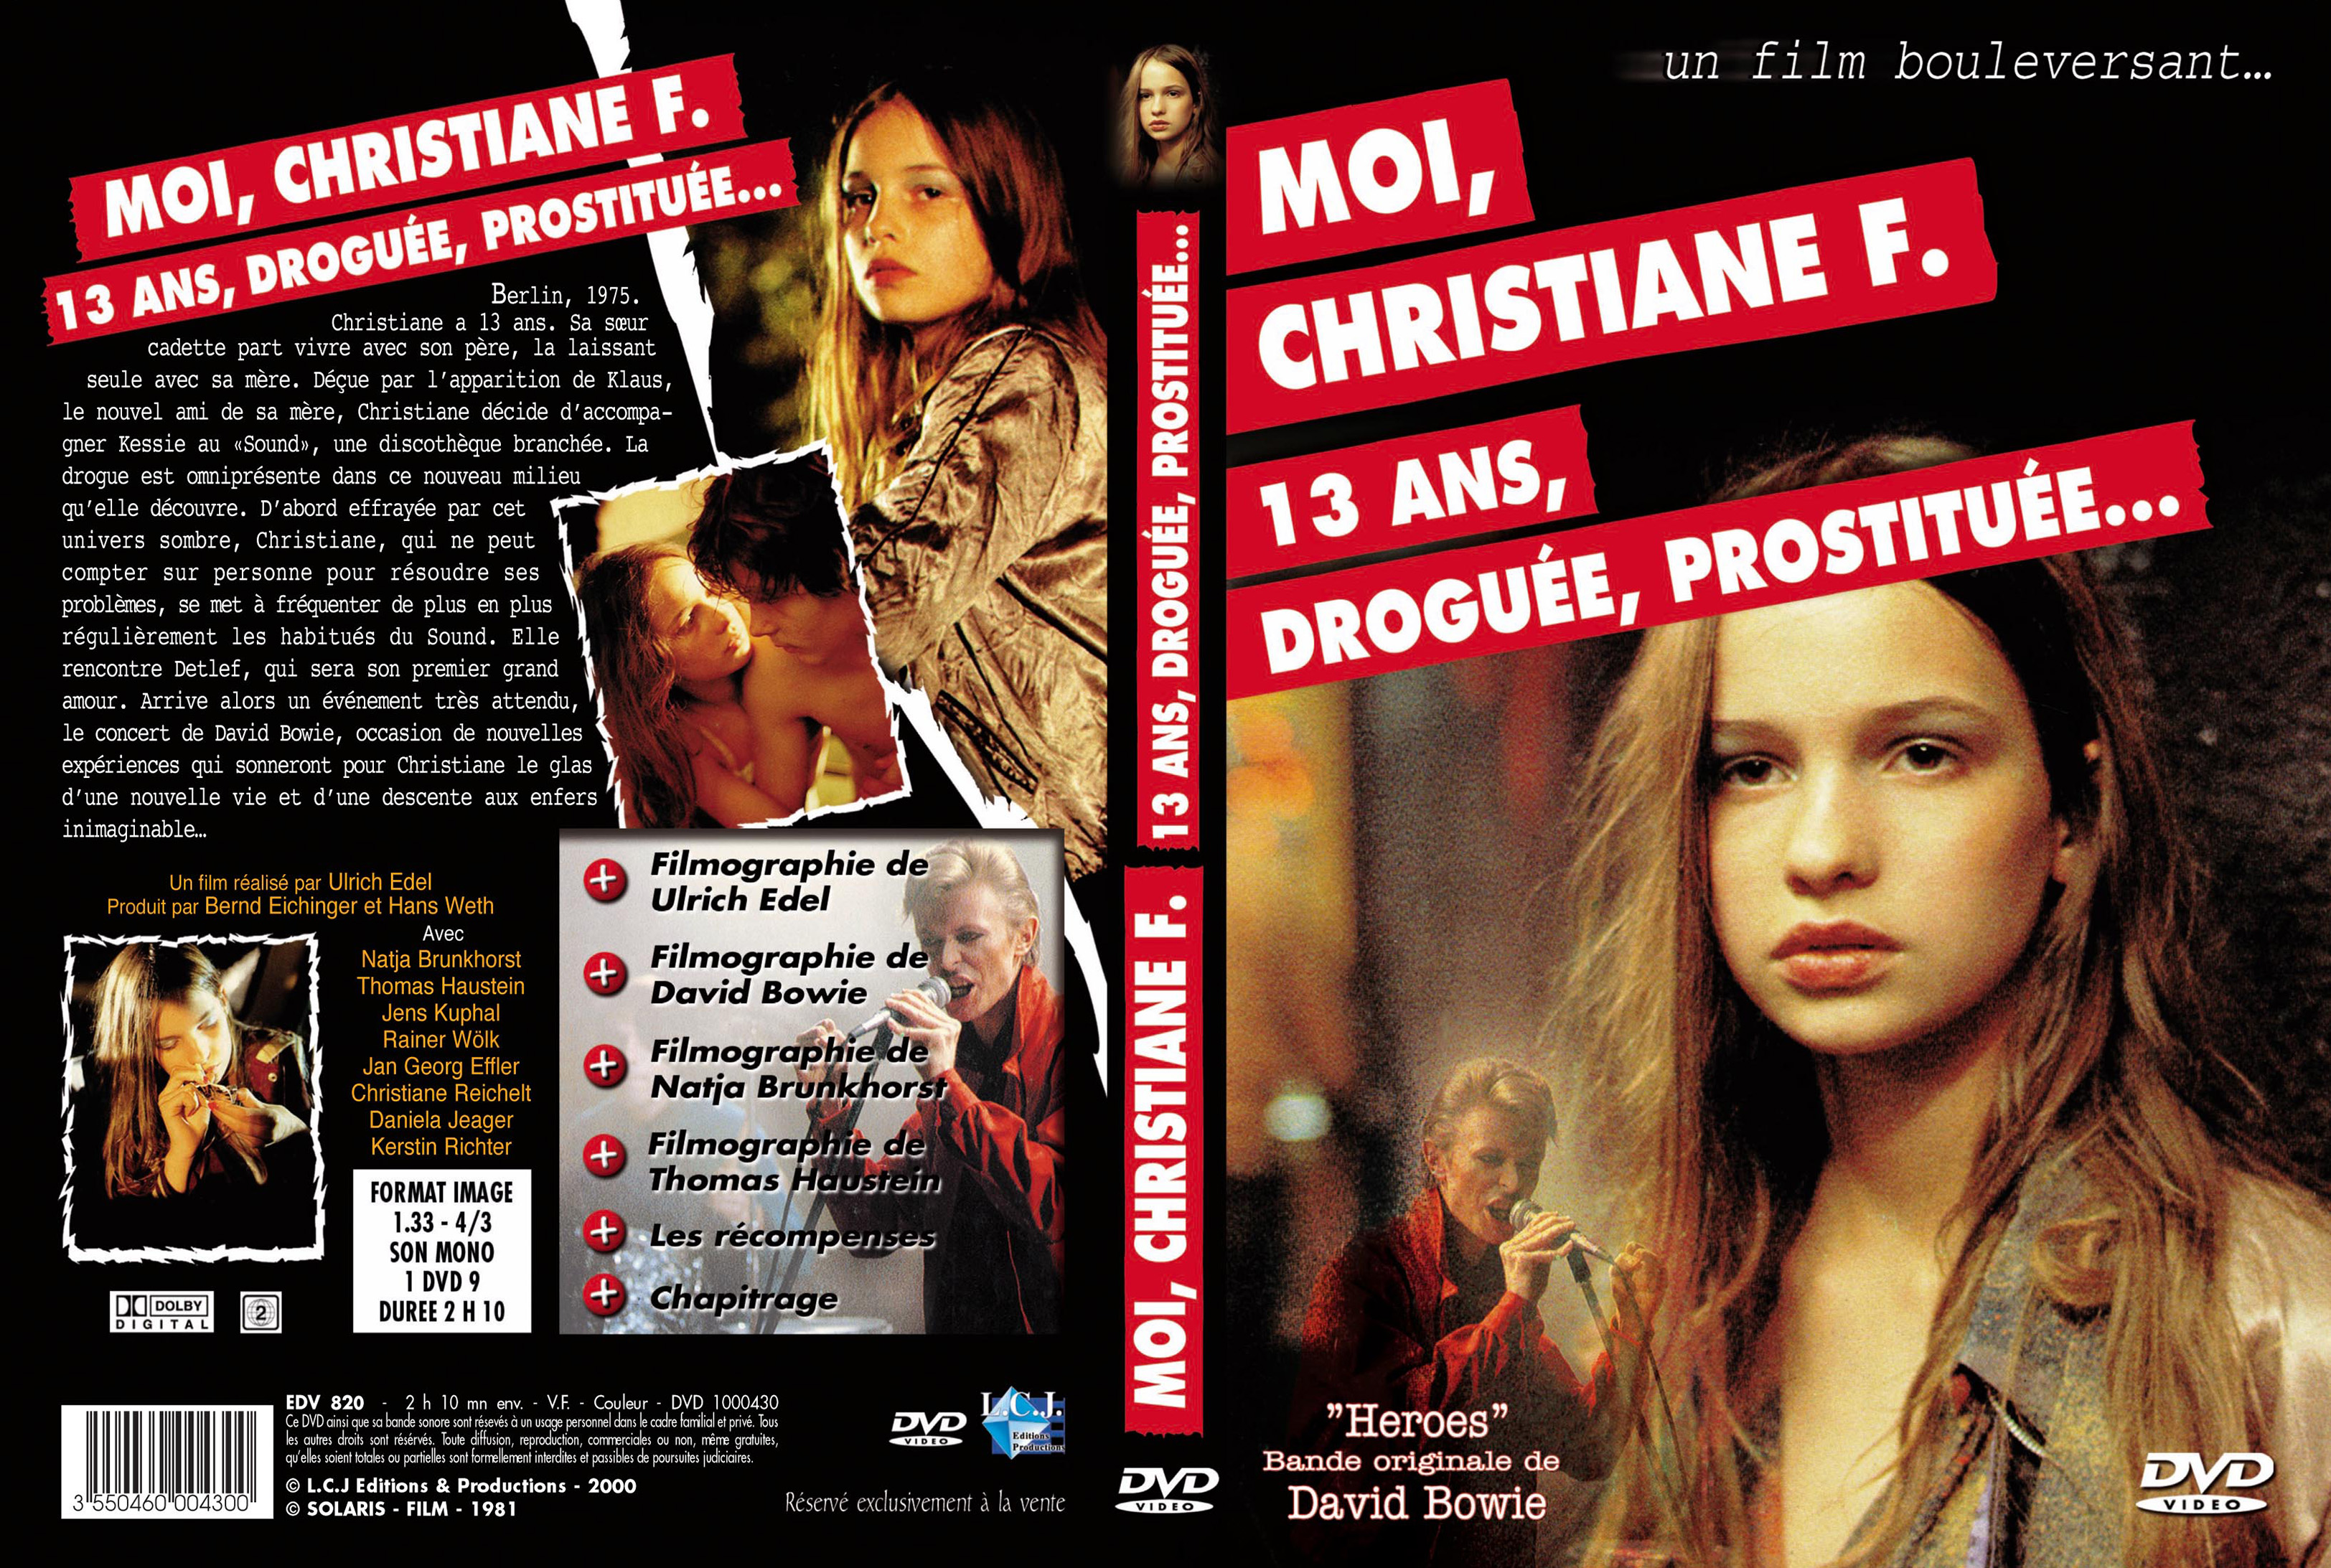 Jaquette DVD Moi christiane f 13 ans droguee prostituee